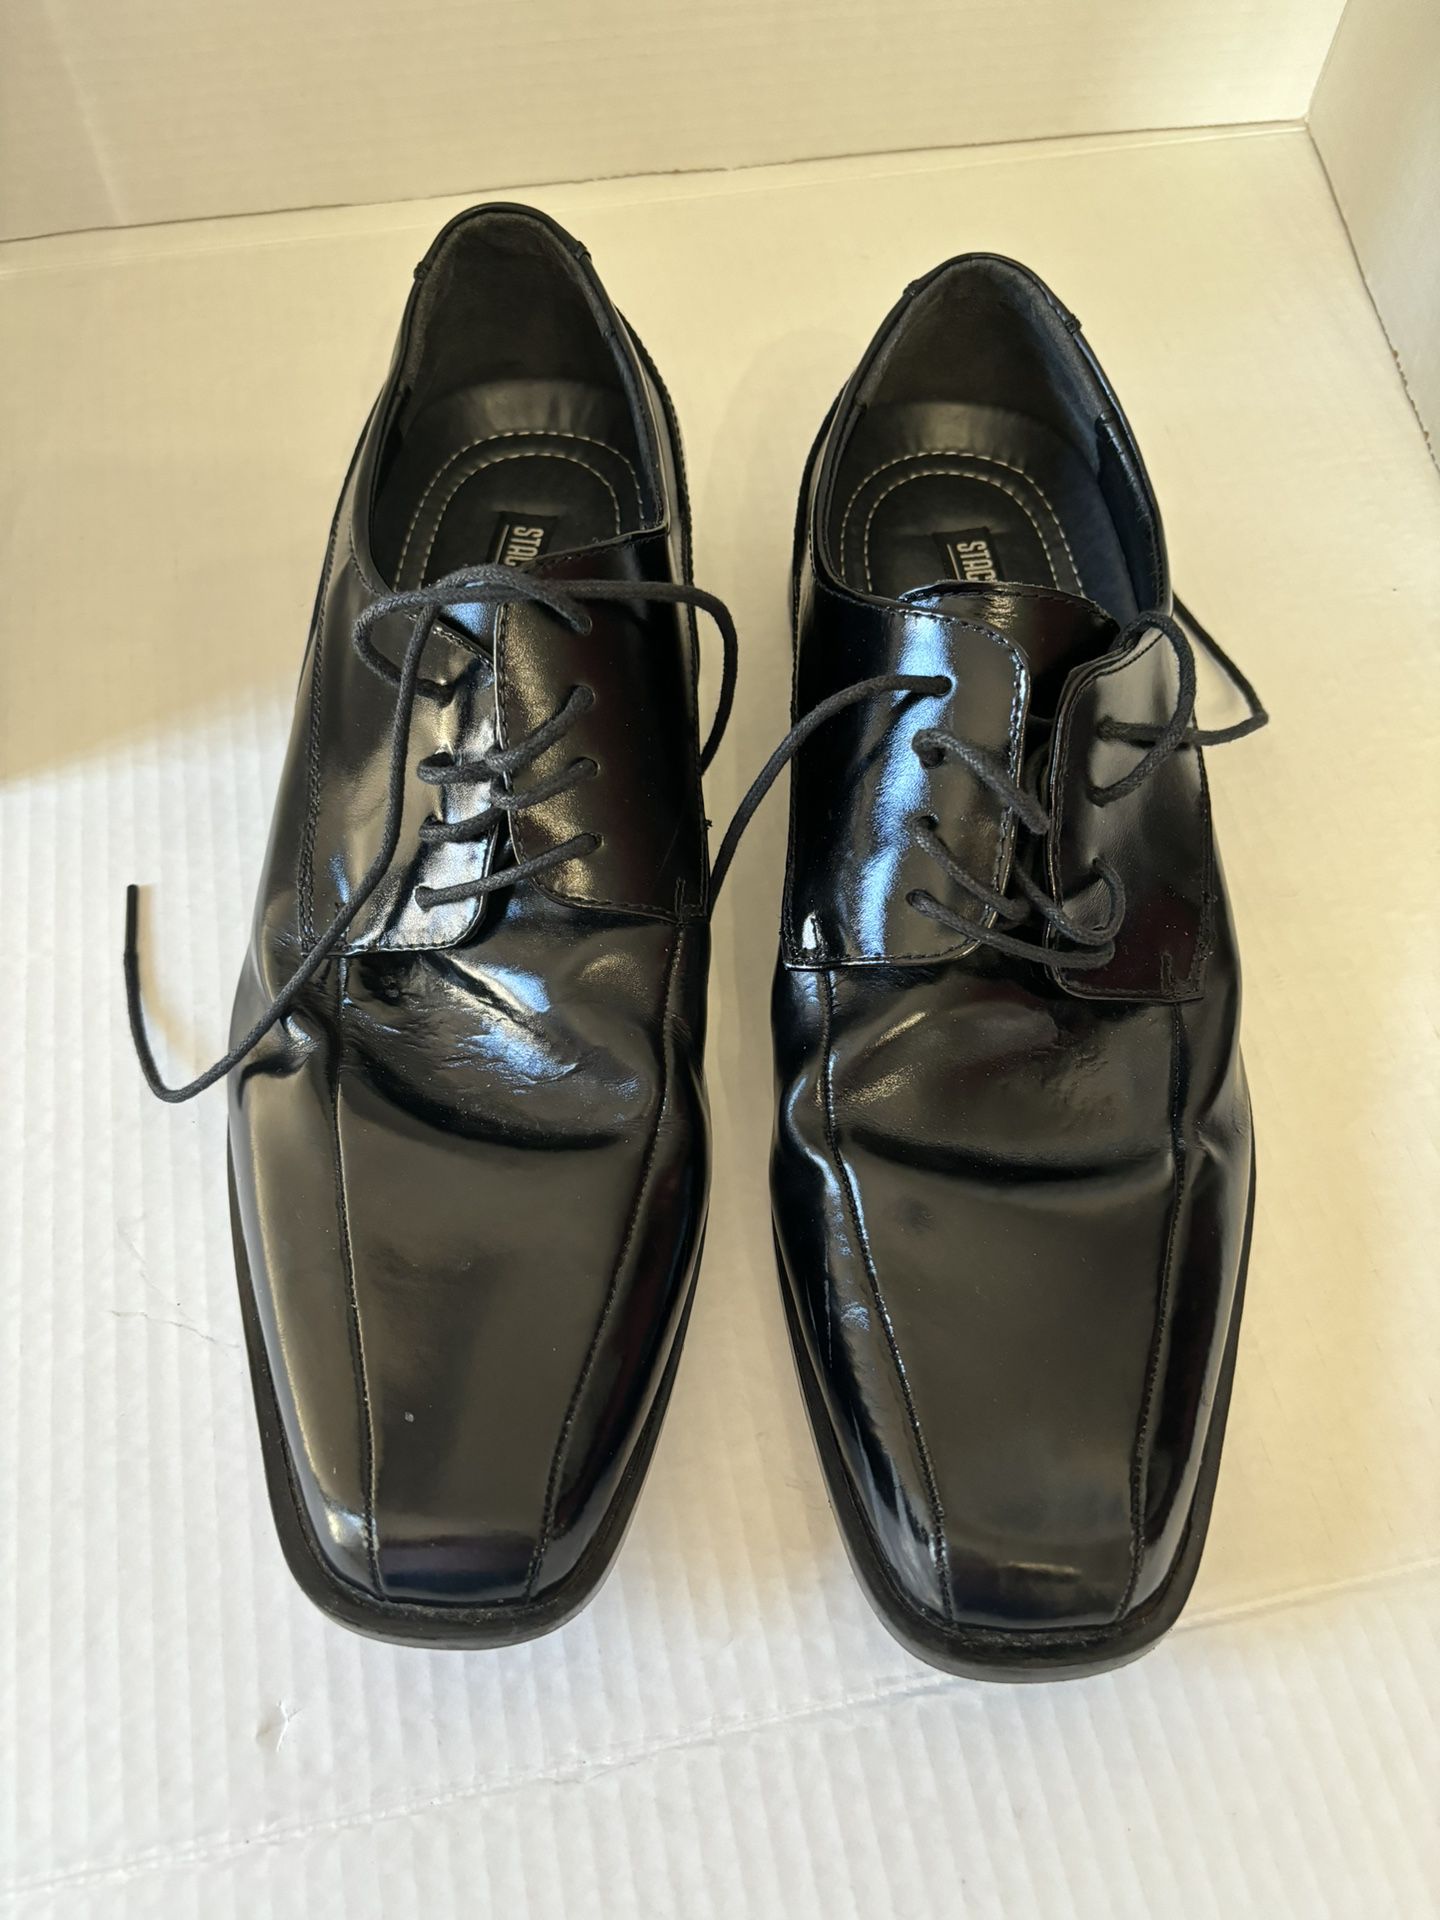 Mens Dress Shoes 10.5M Black Leather Derby Oxford Square Toe Lace Up Stacy Adams